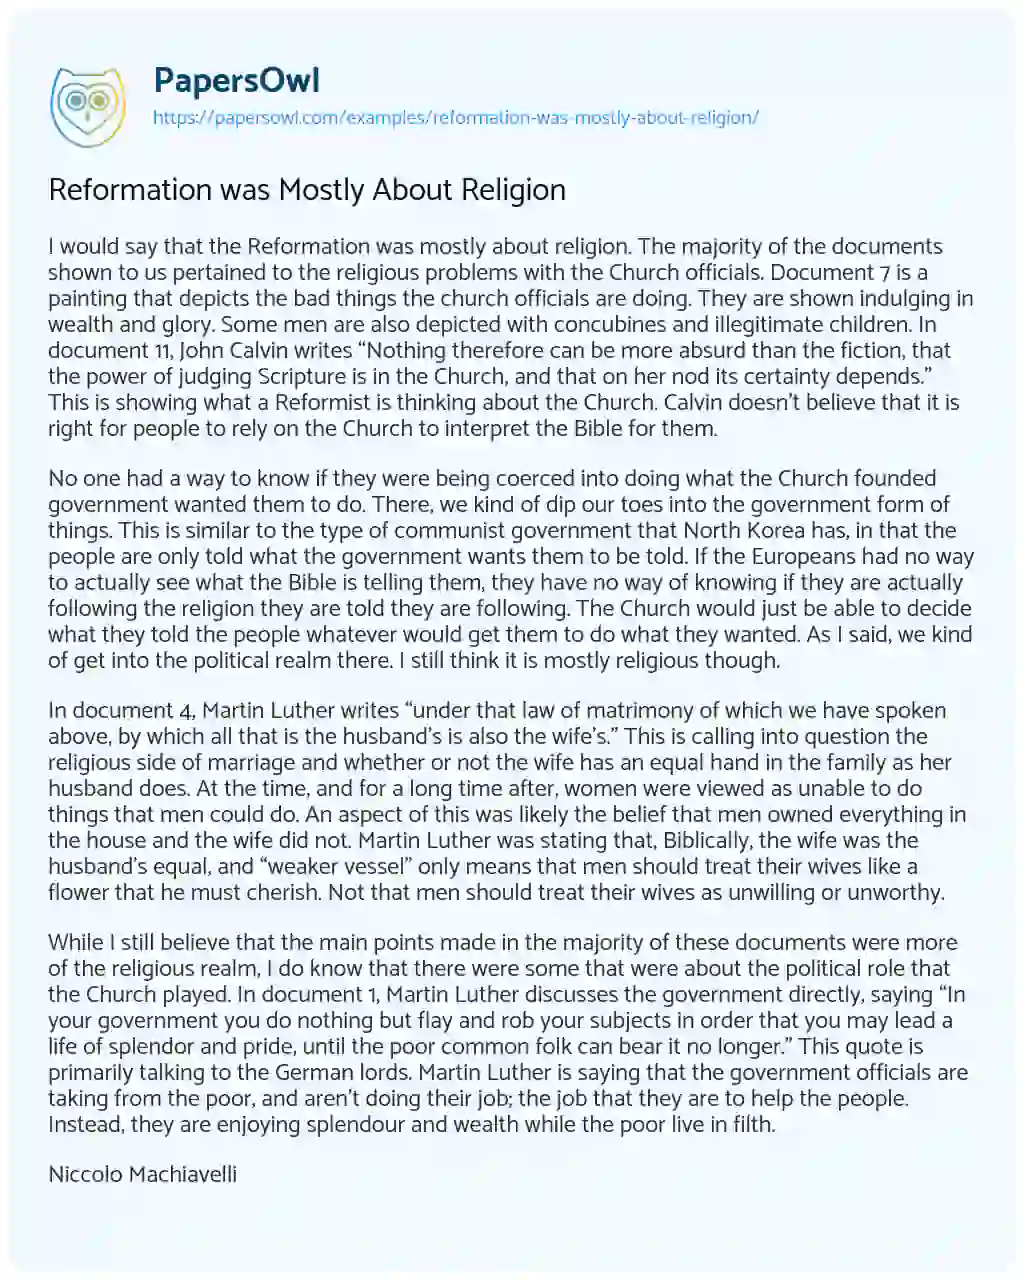 Reformation was Mostly about Religion essay